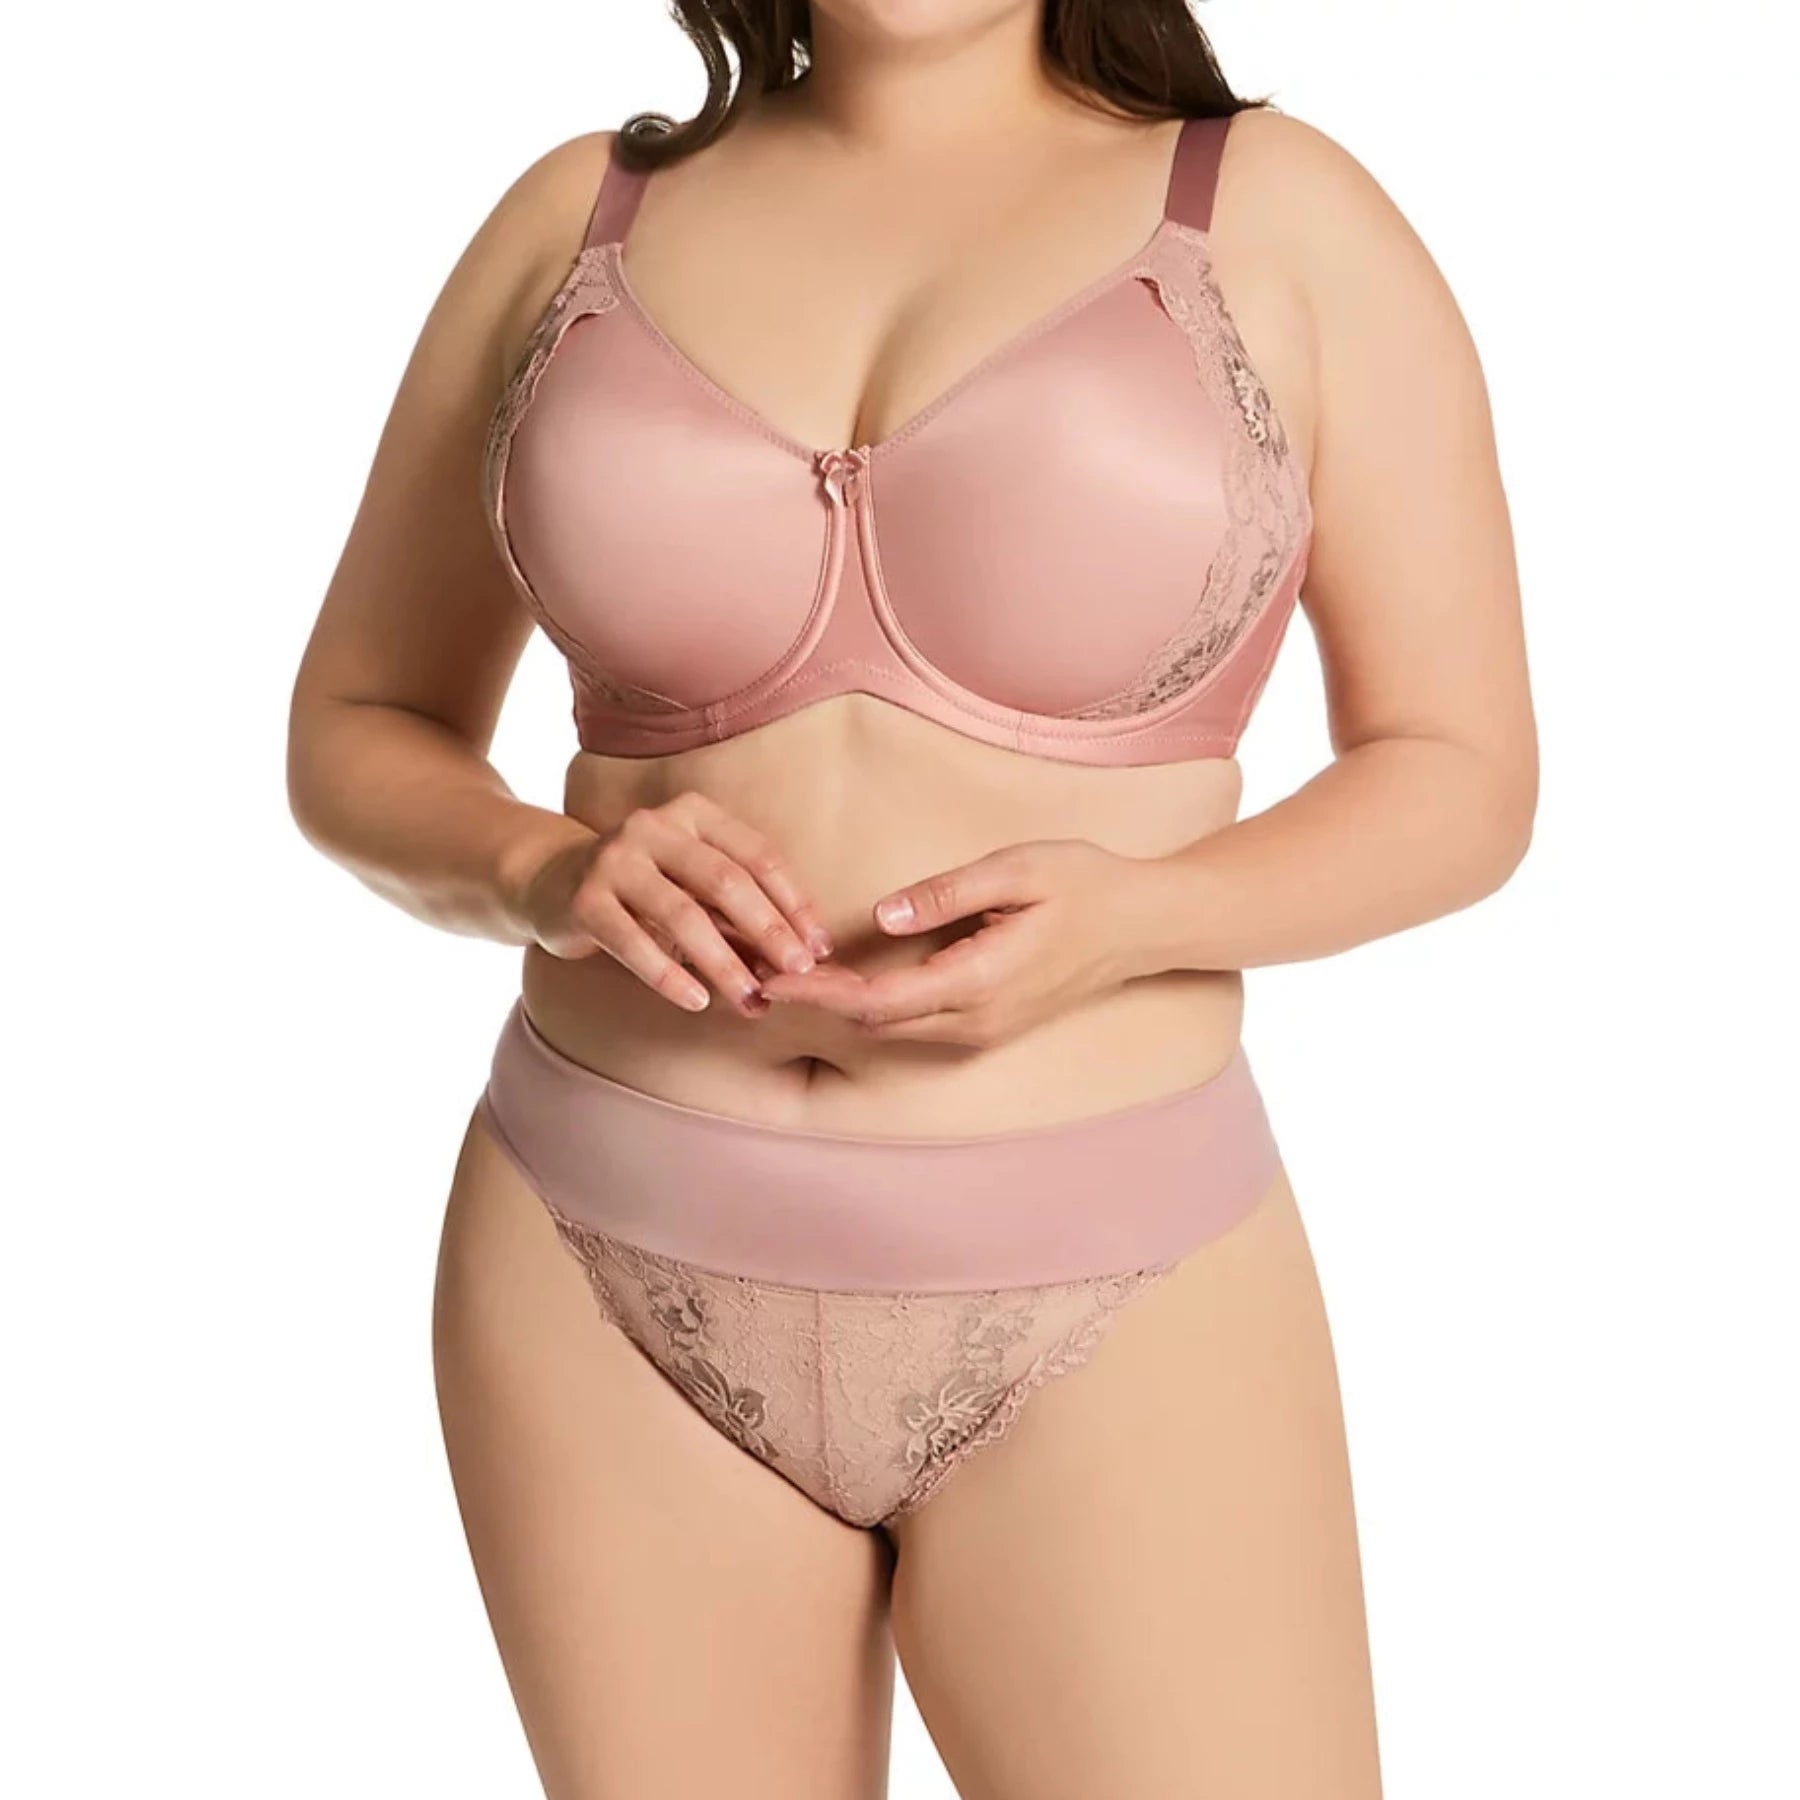 Microfiber & Lace Molded Underwire 2911 - Dusty Rose